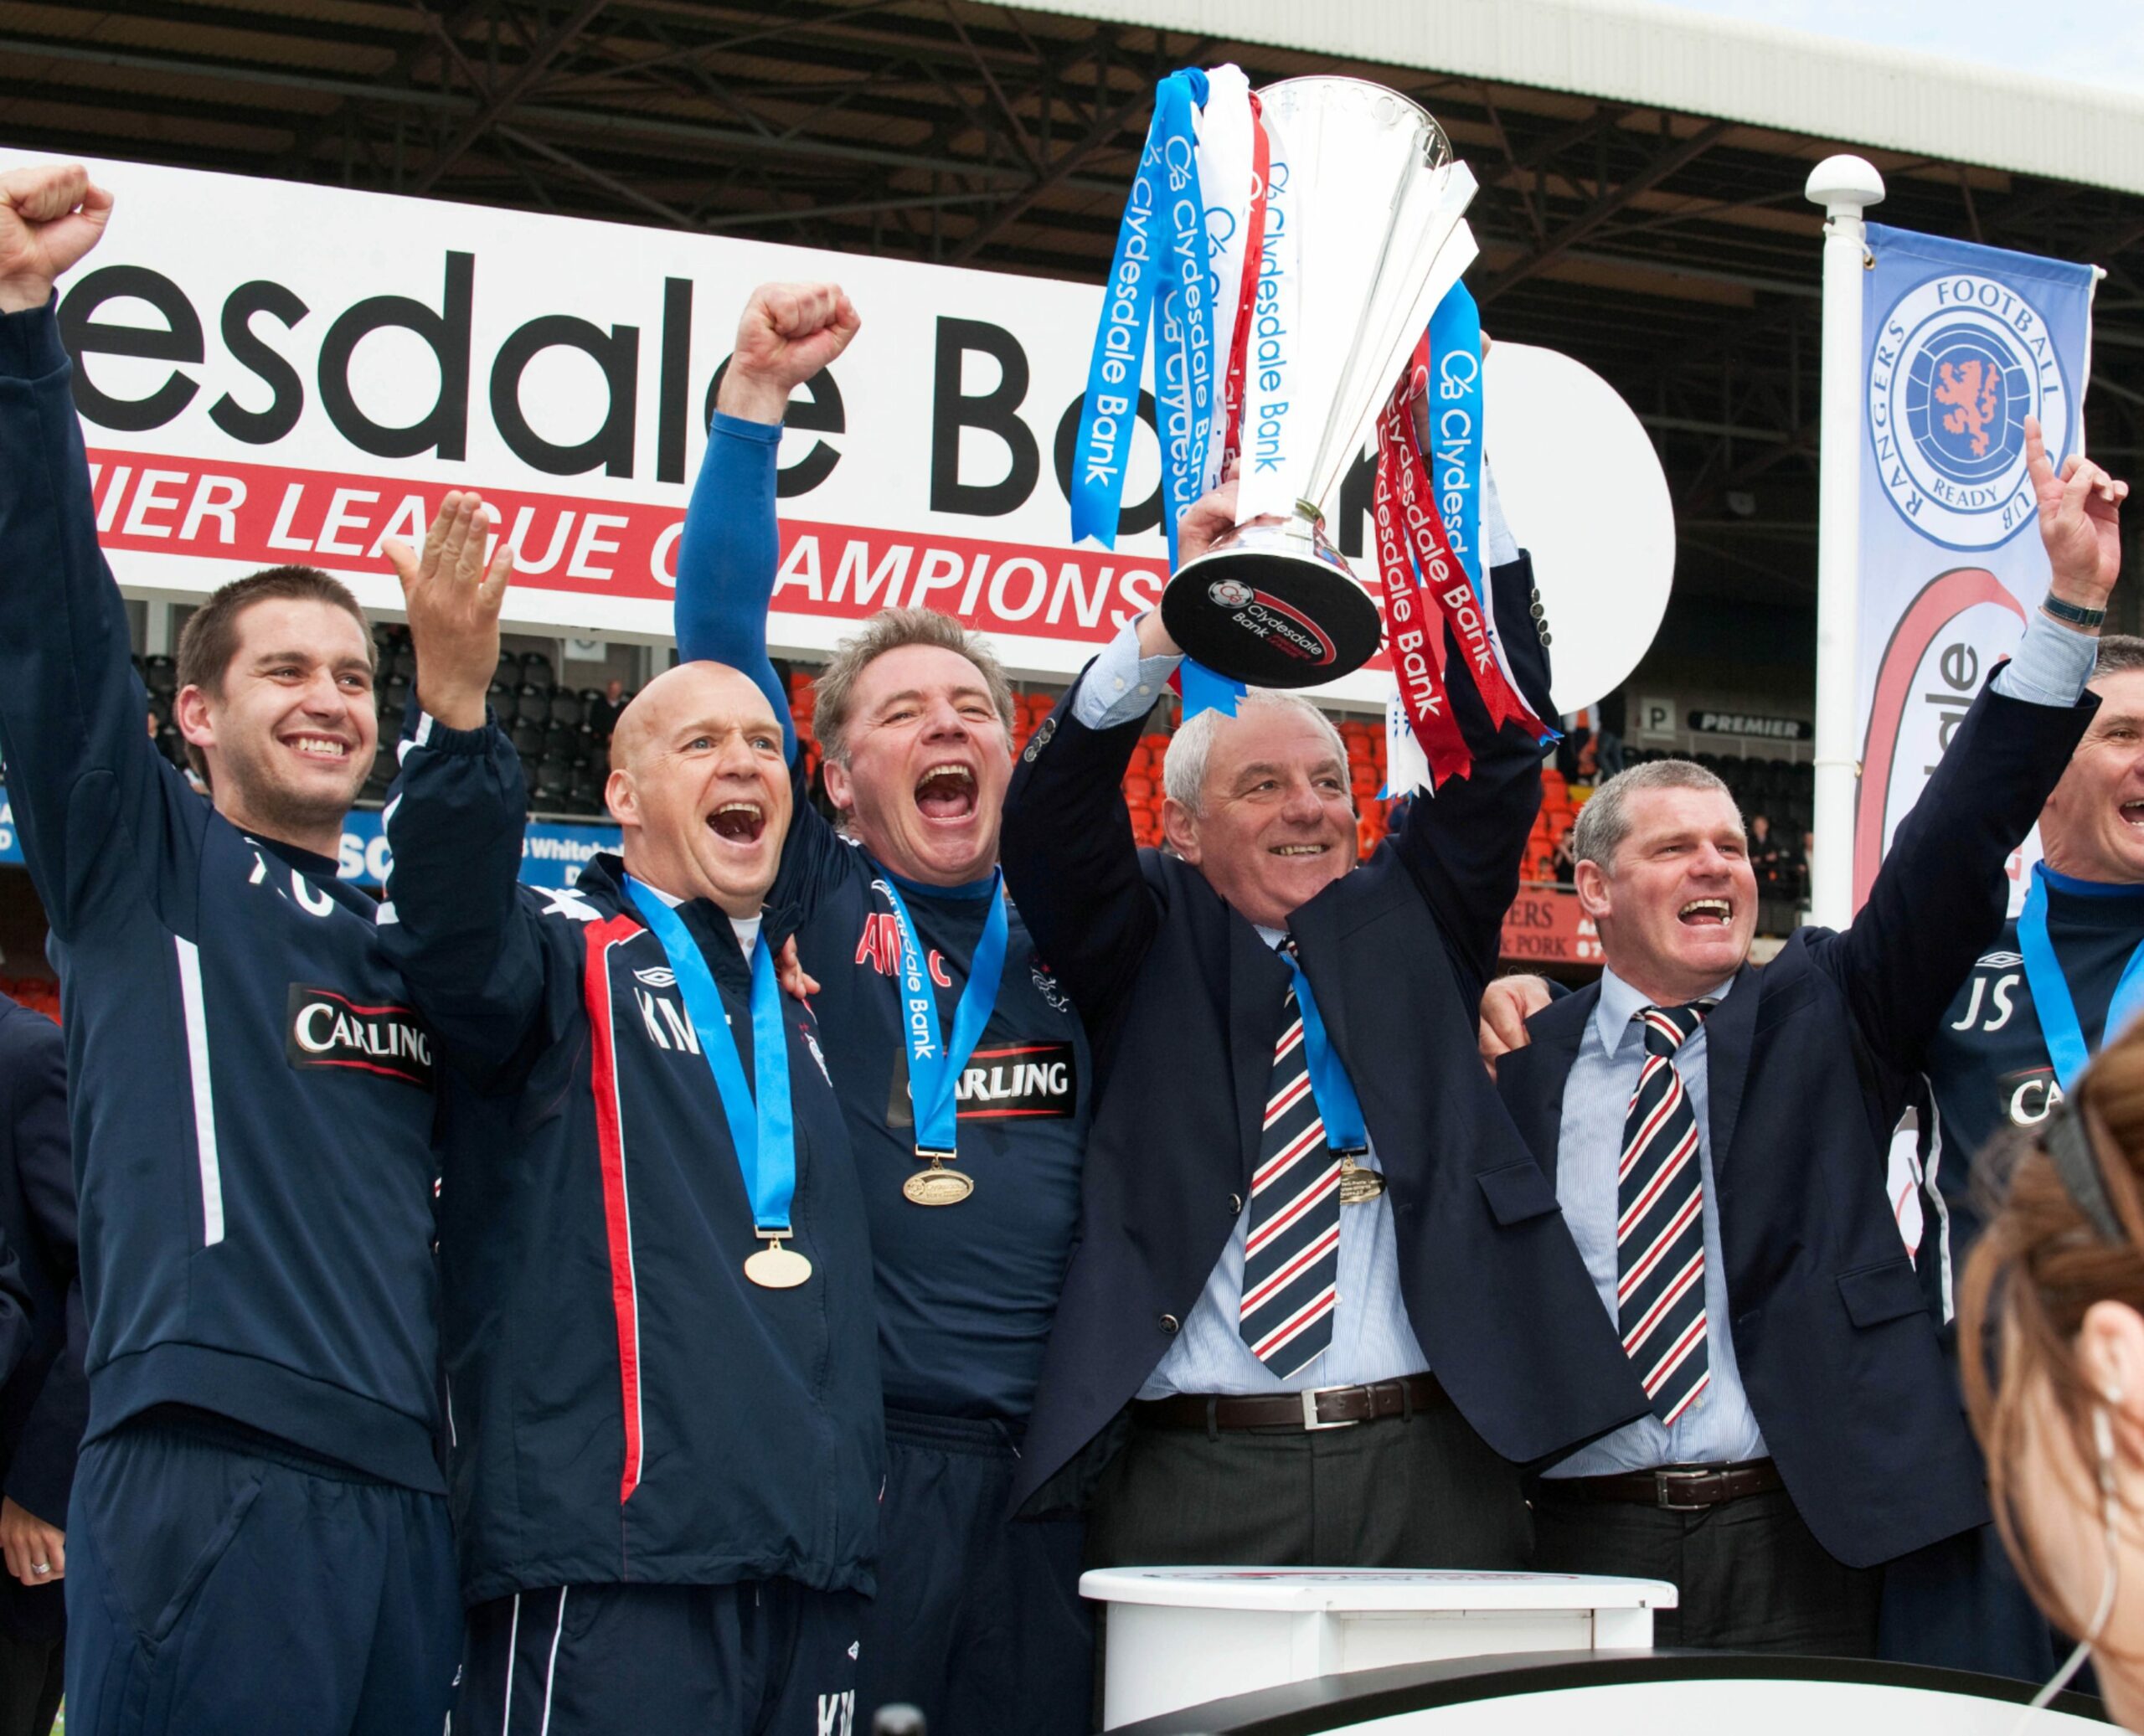 On either side of Walter Smith, Ally McCoist and Ian Durrant celebrate Rangers’ title win in 2011